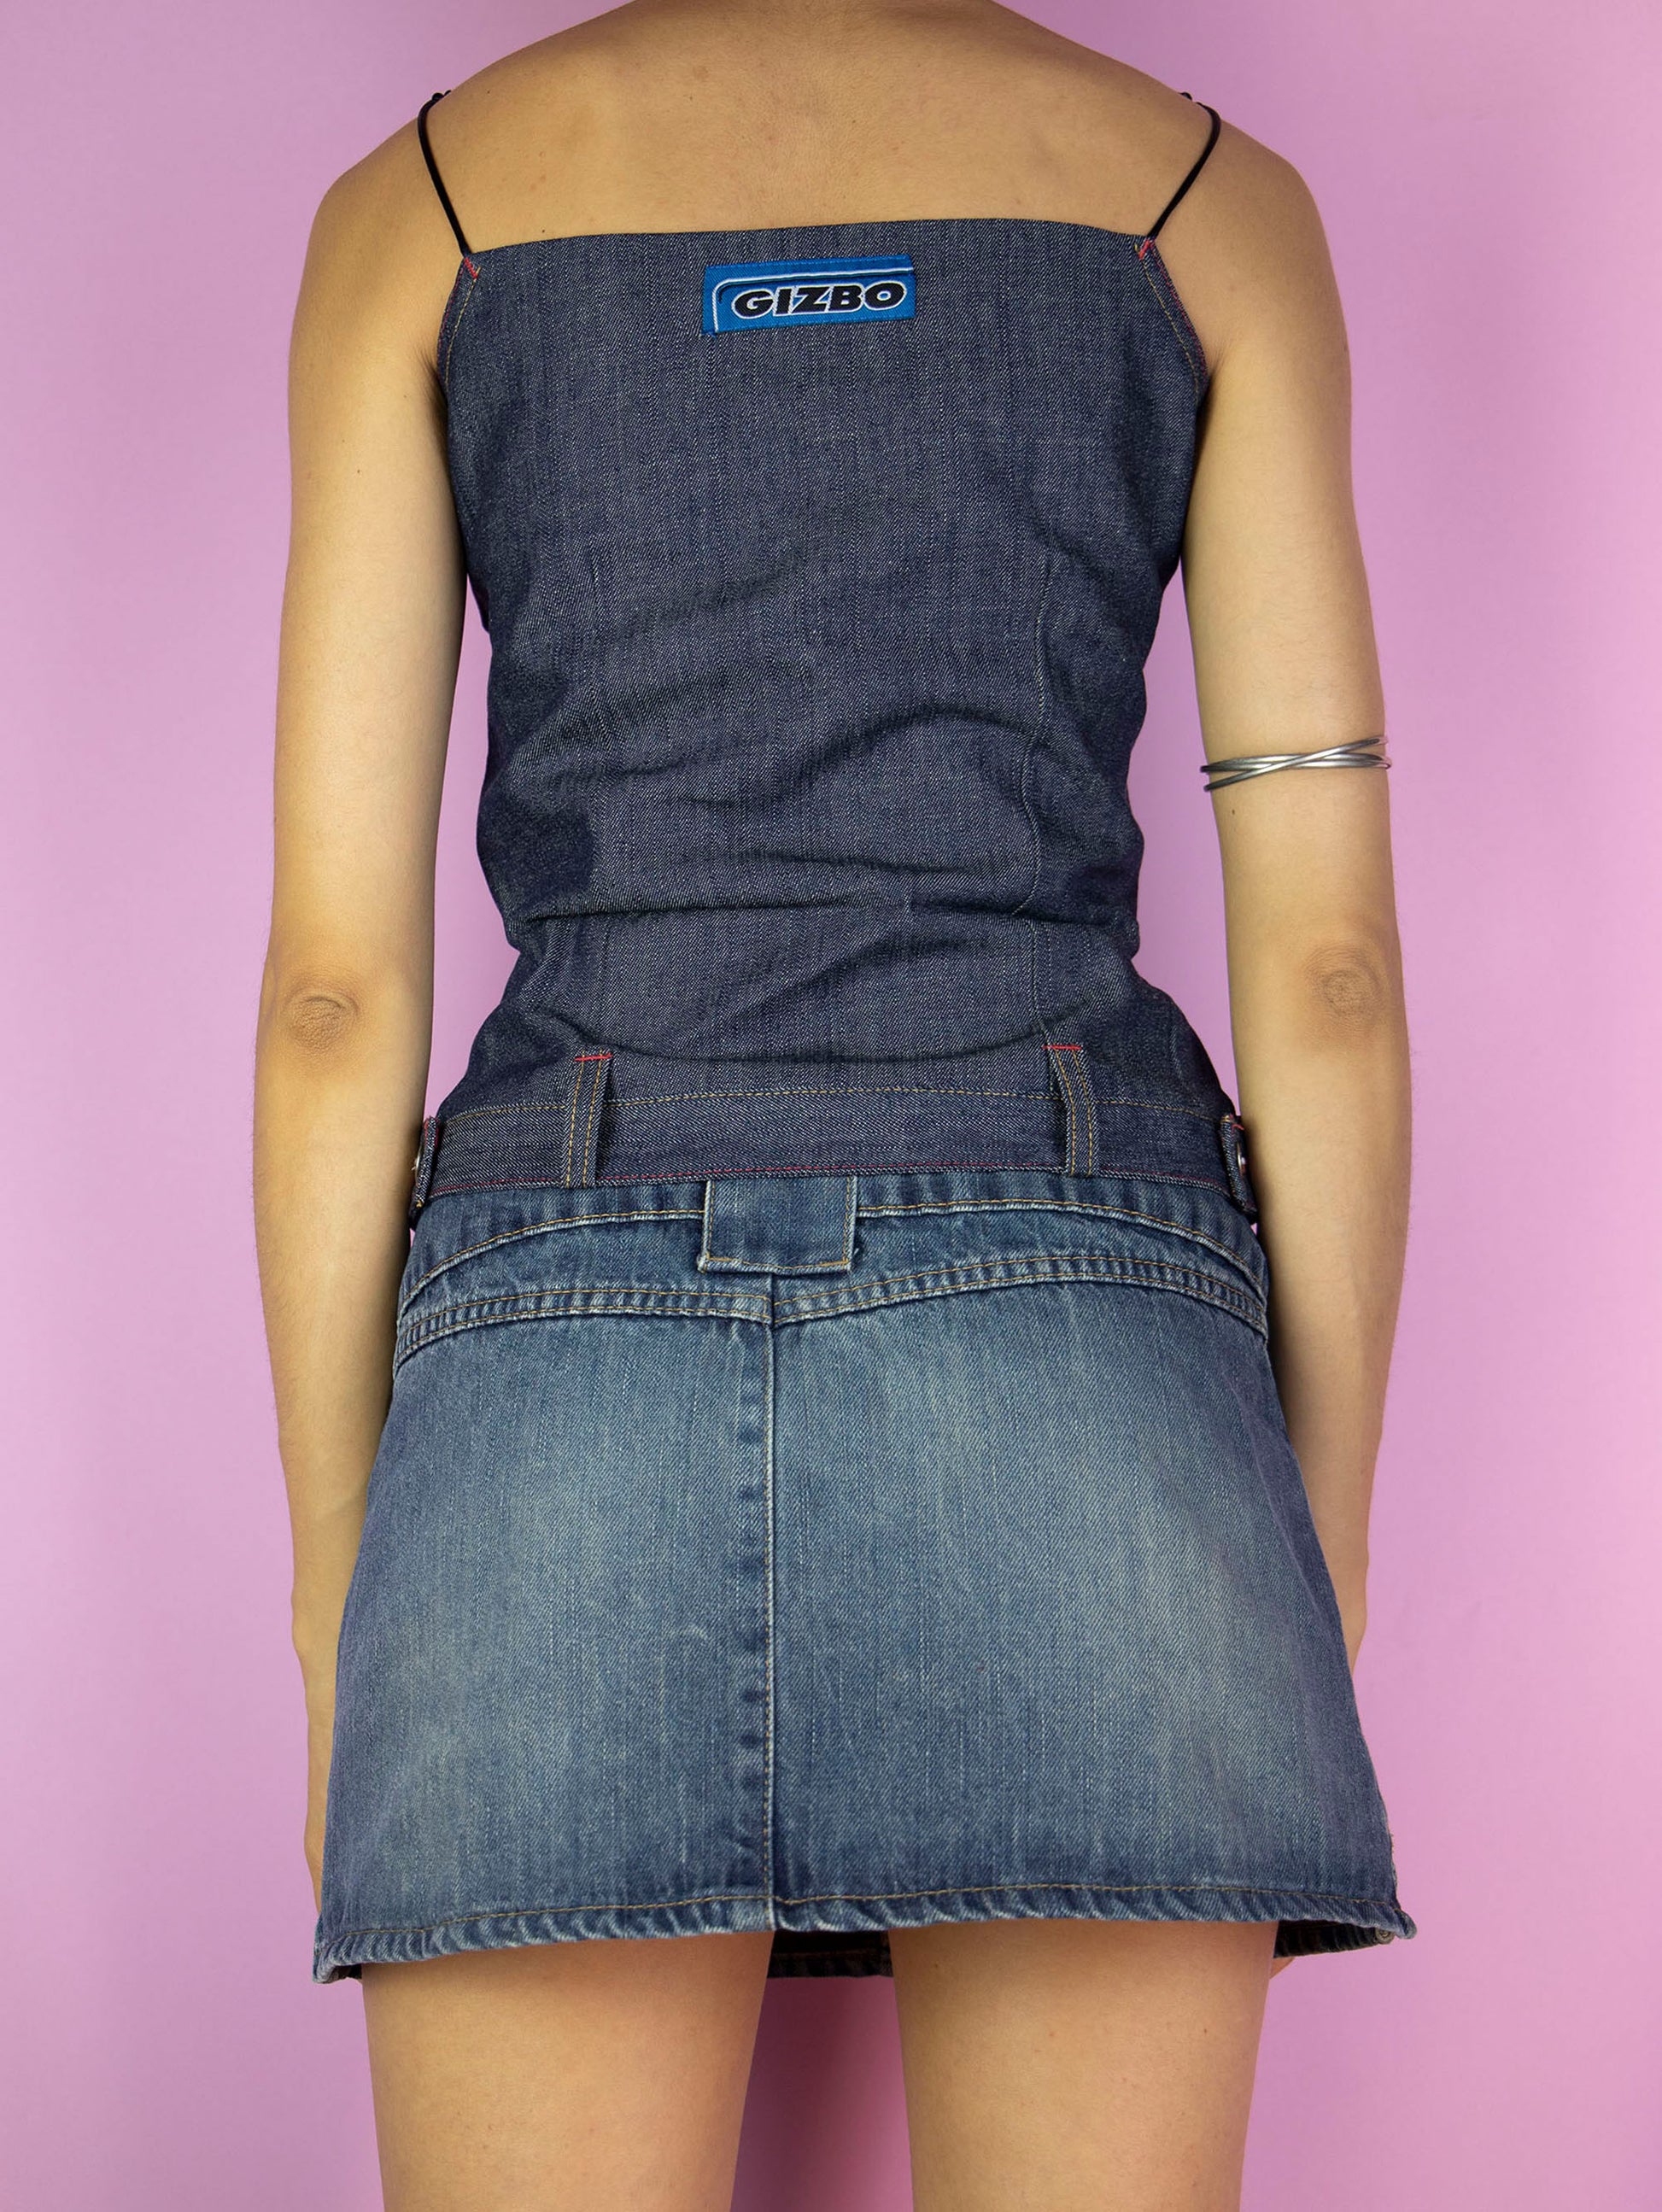 The Y2K Denim Tank Top is a vintage dark denim top with tied straps, pleats, and a side zipper closure. Cyber grunge 2000s subversive top.